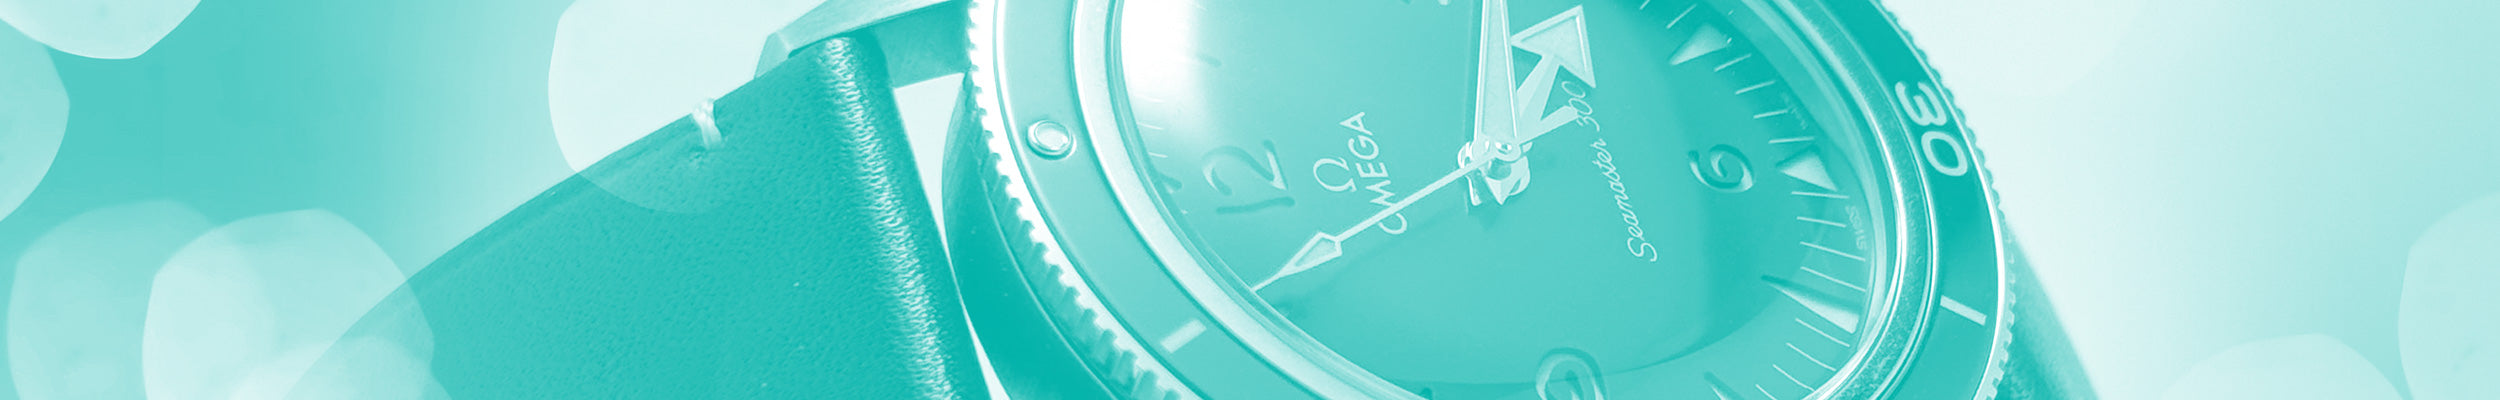 Close up image of a pre-owned OMGEA watch with a teal background.